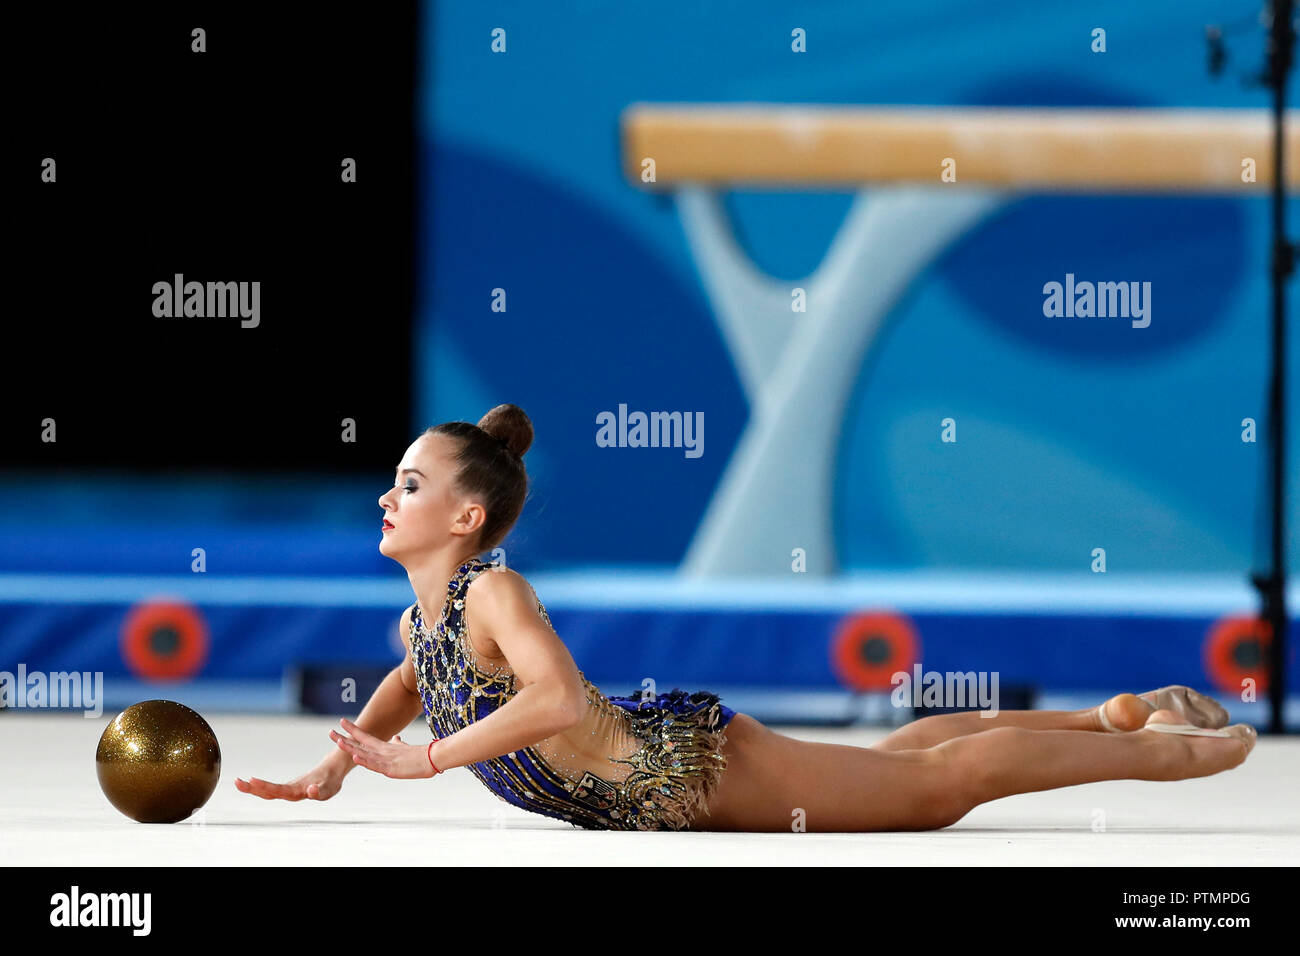 Buenos Aires, Argentina. 09th Oct, 2018. Olympia: III Olympic Summer Youth Games. Rotaermel Lilly from Germany takes part in the individual competition of rhythmic gymnastics at the Olympic Youth Games. Credit: Gustavo Ortiz/dpa/Alamy Live News Stock Photo